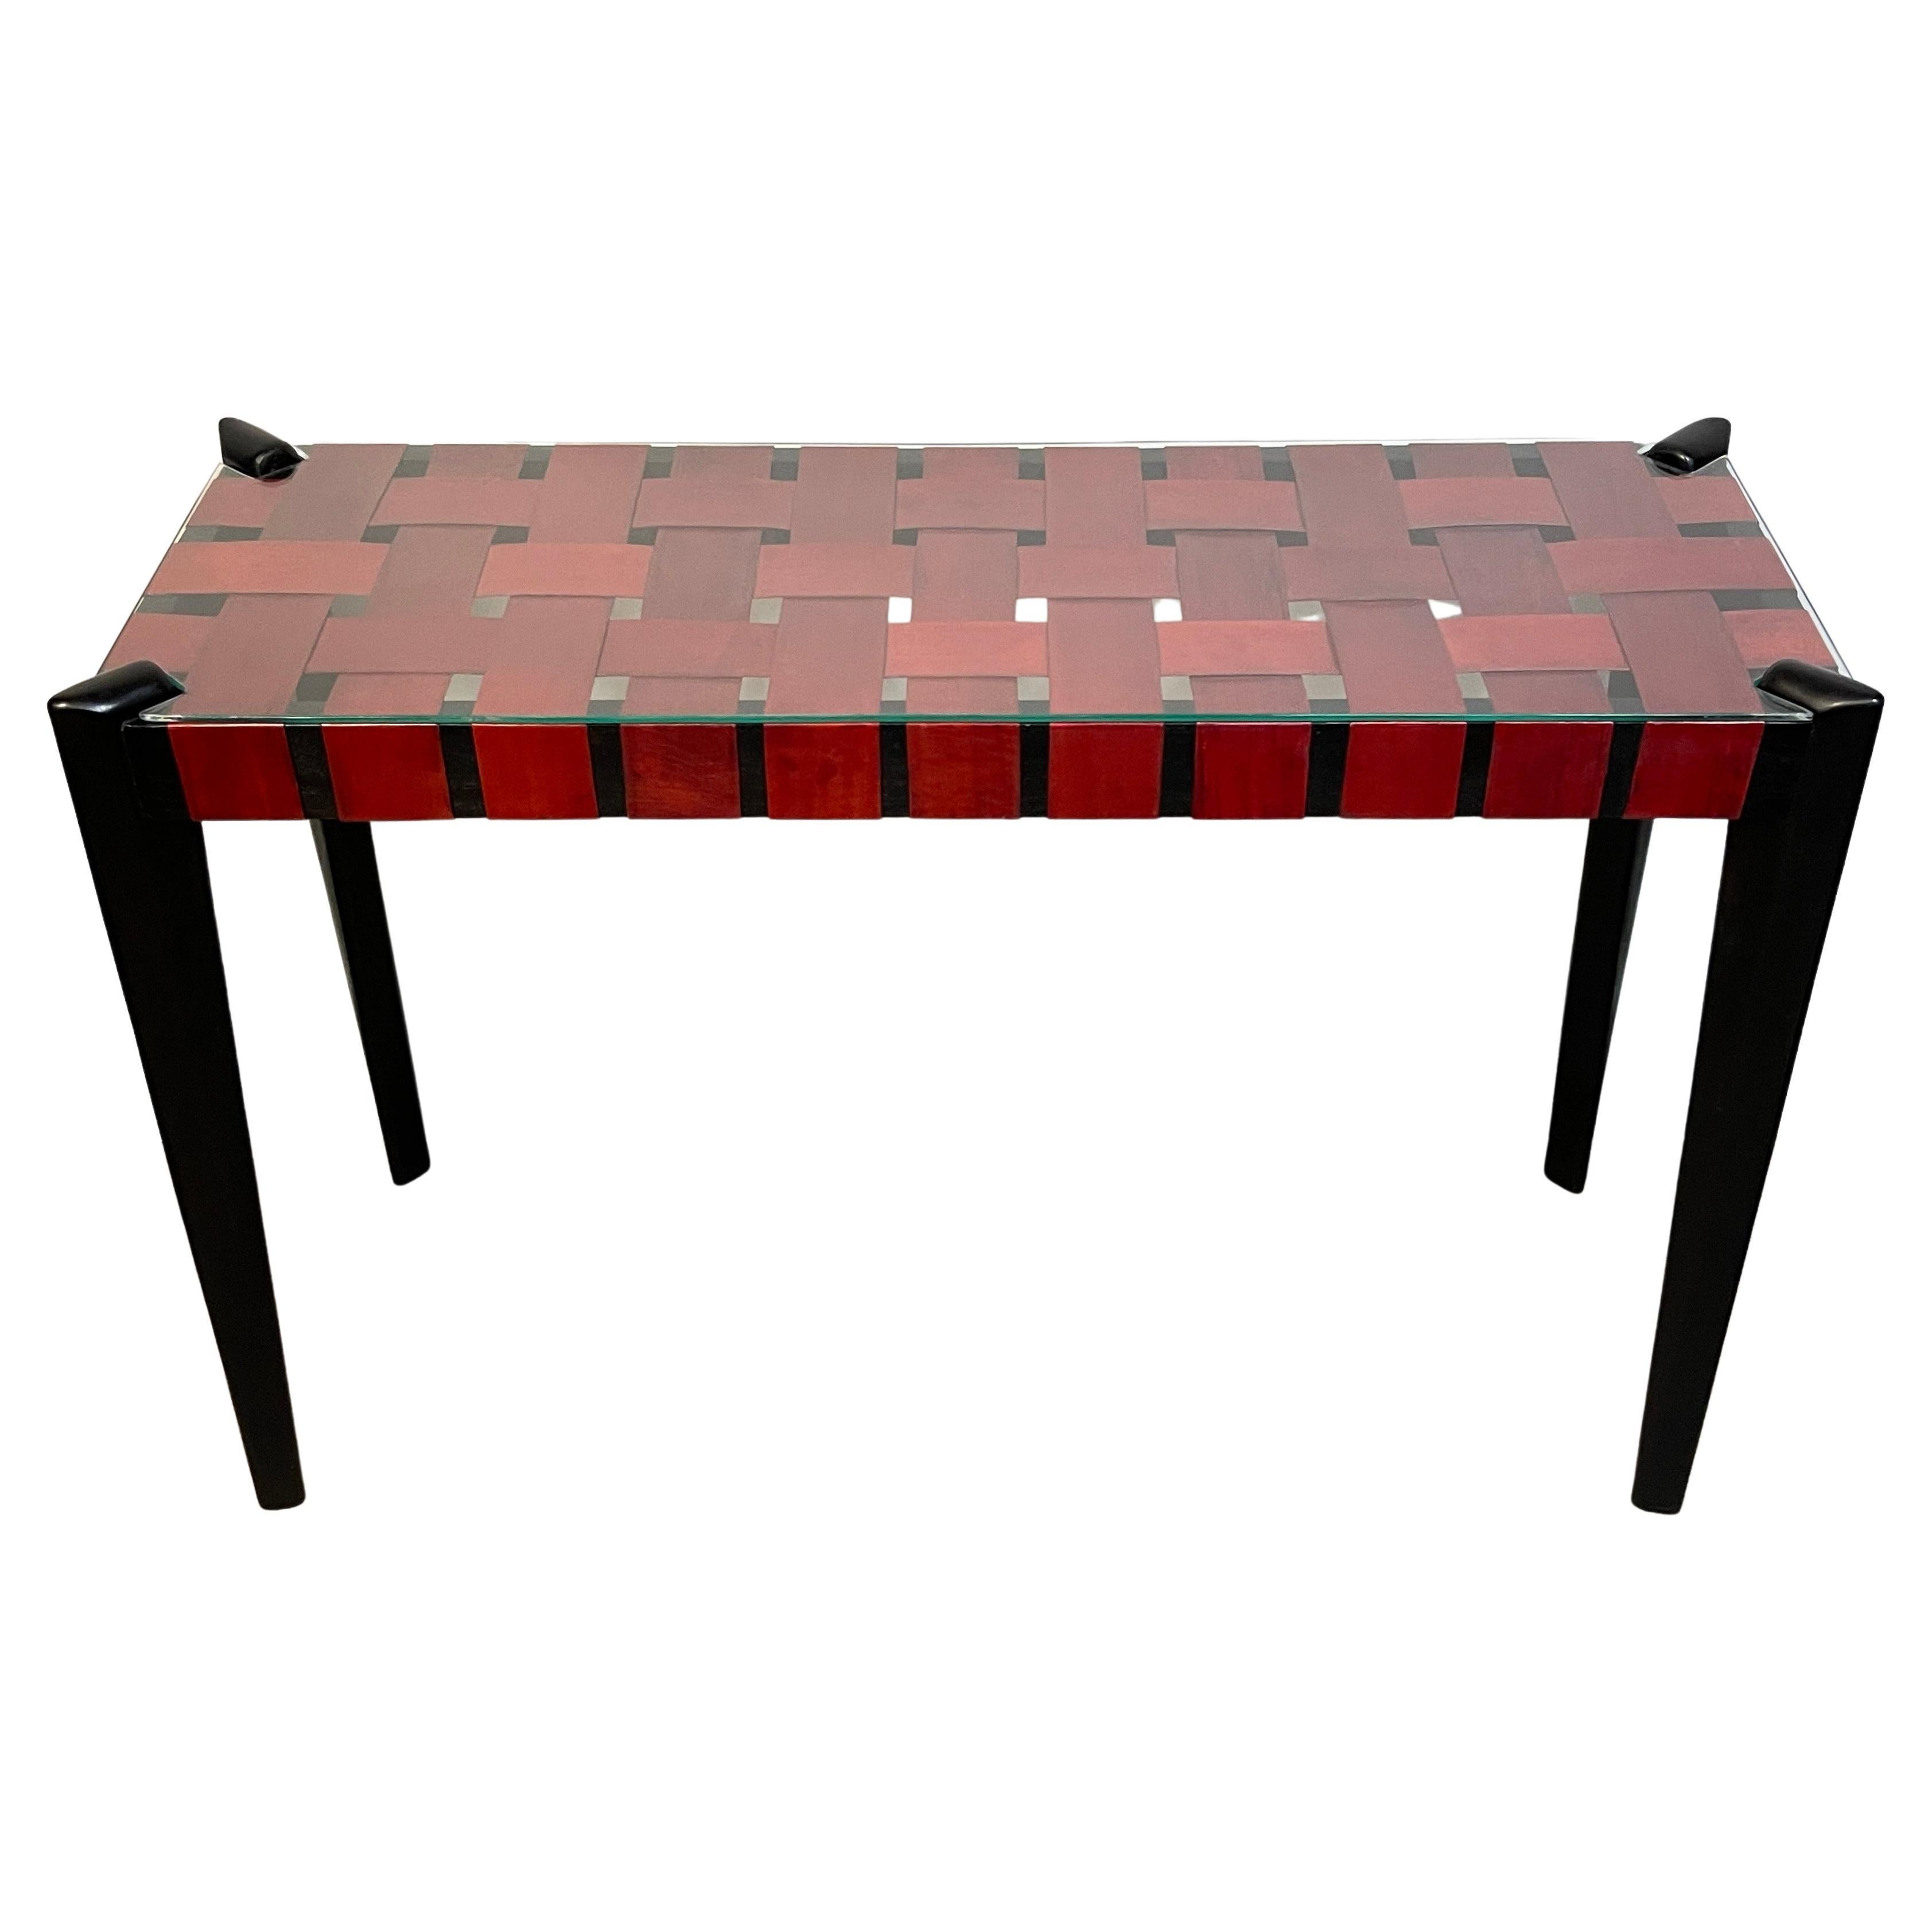 French modern woven red leather strap console table
Sleek, well designed with four ebonized tapering angled legs, supporting the top with 3-Inch wide woven red leather straps, with glass top.
The console measures 48-Inches wide x 17-inches deep x